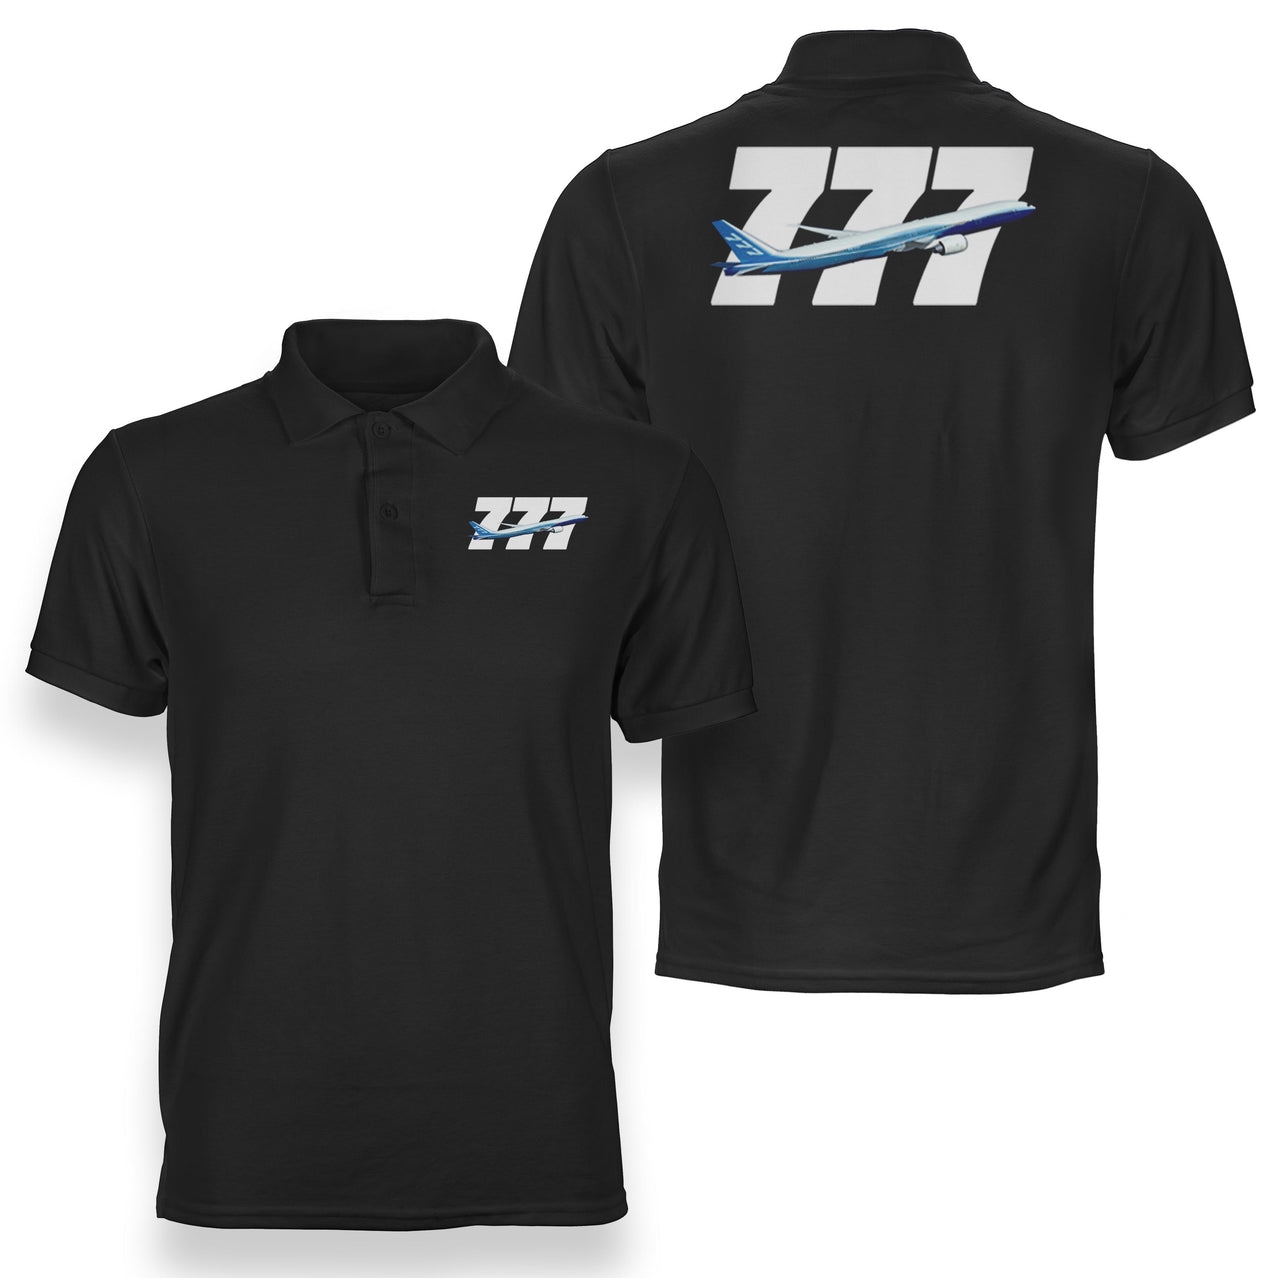 Super Boeing 777 Designed Double Side Polo T-Shirts